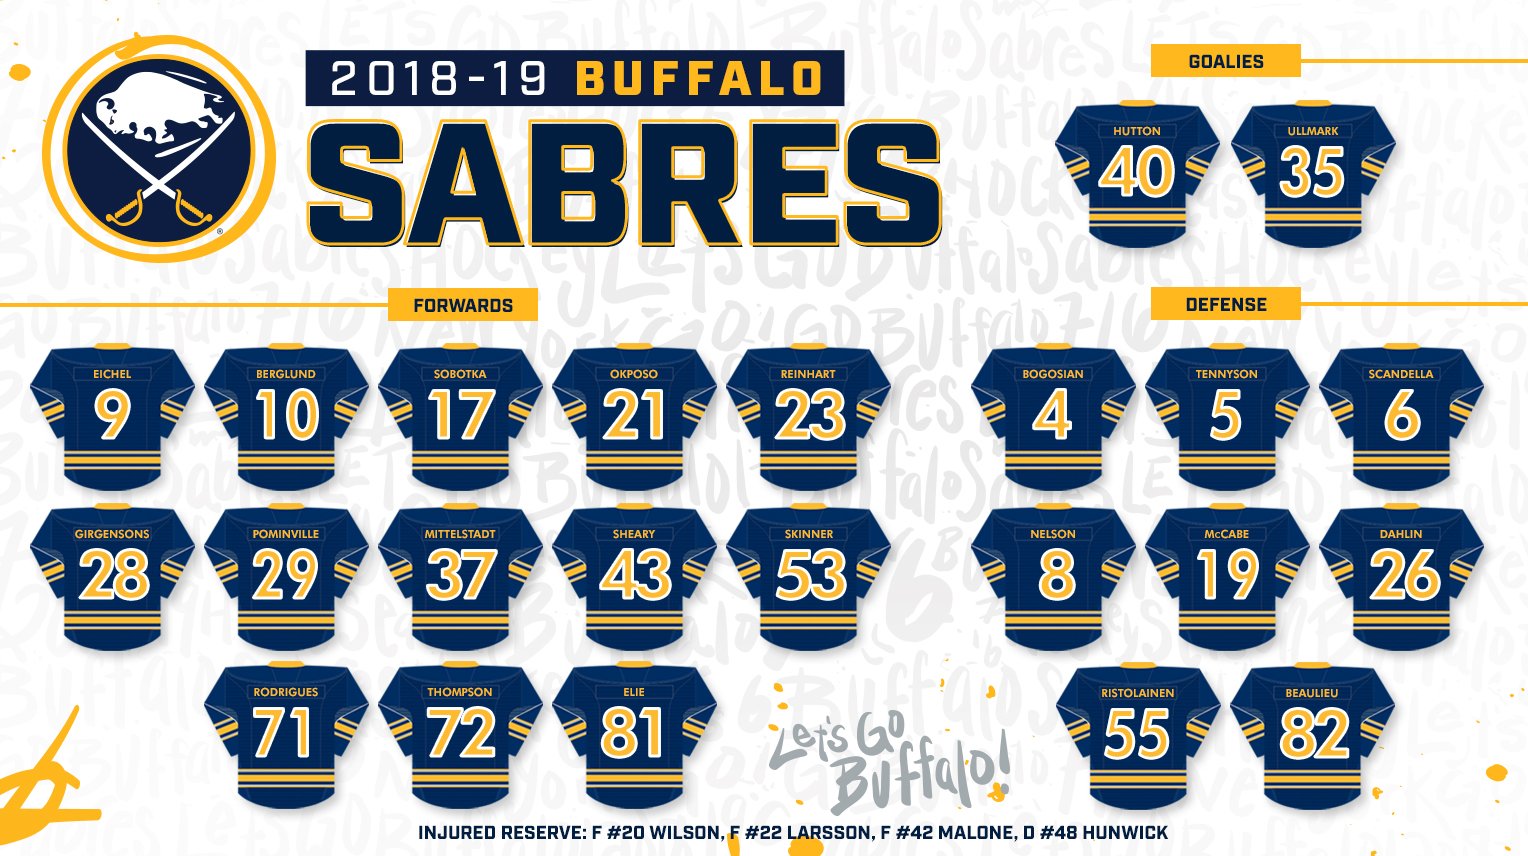 Sabres Twitter: "Introducing your 2018-19 Buffalo Sabres! ⚔️ https://t.co/QSH77pFAxX" / Twitter